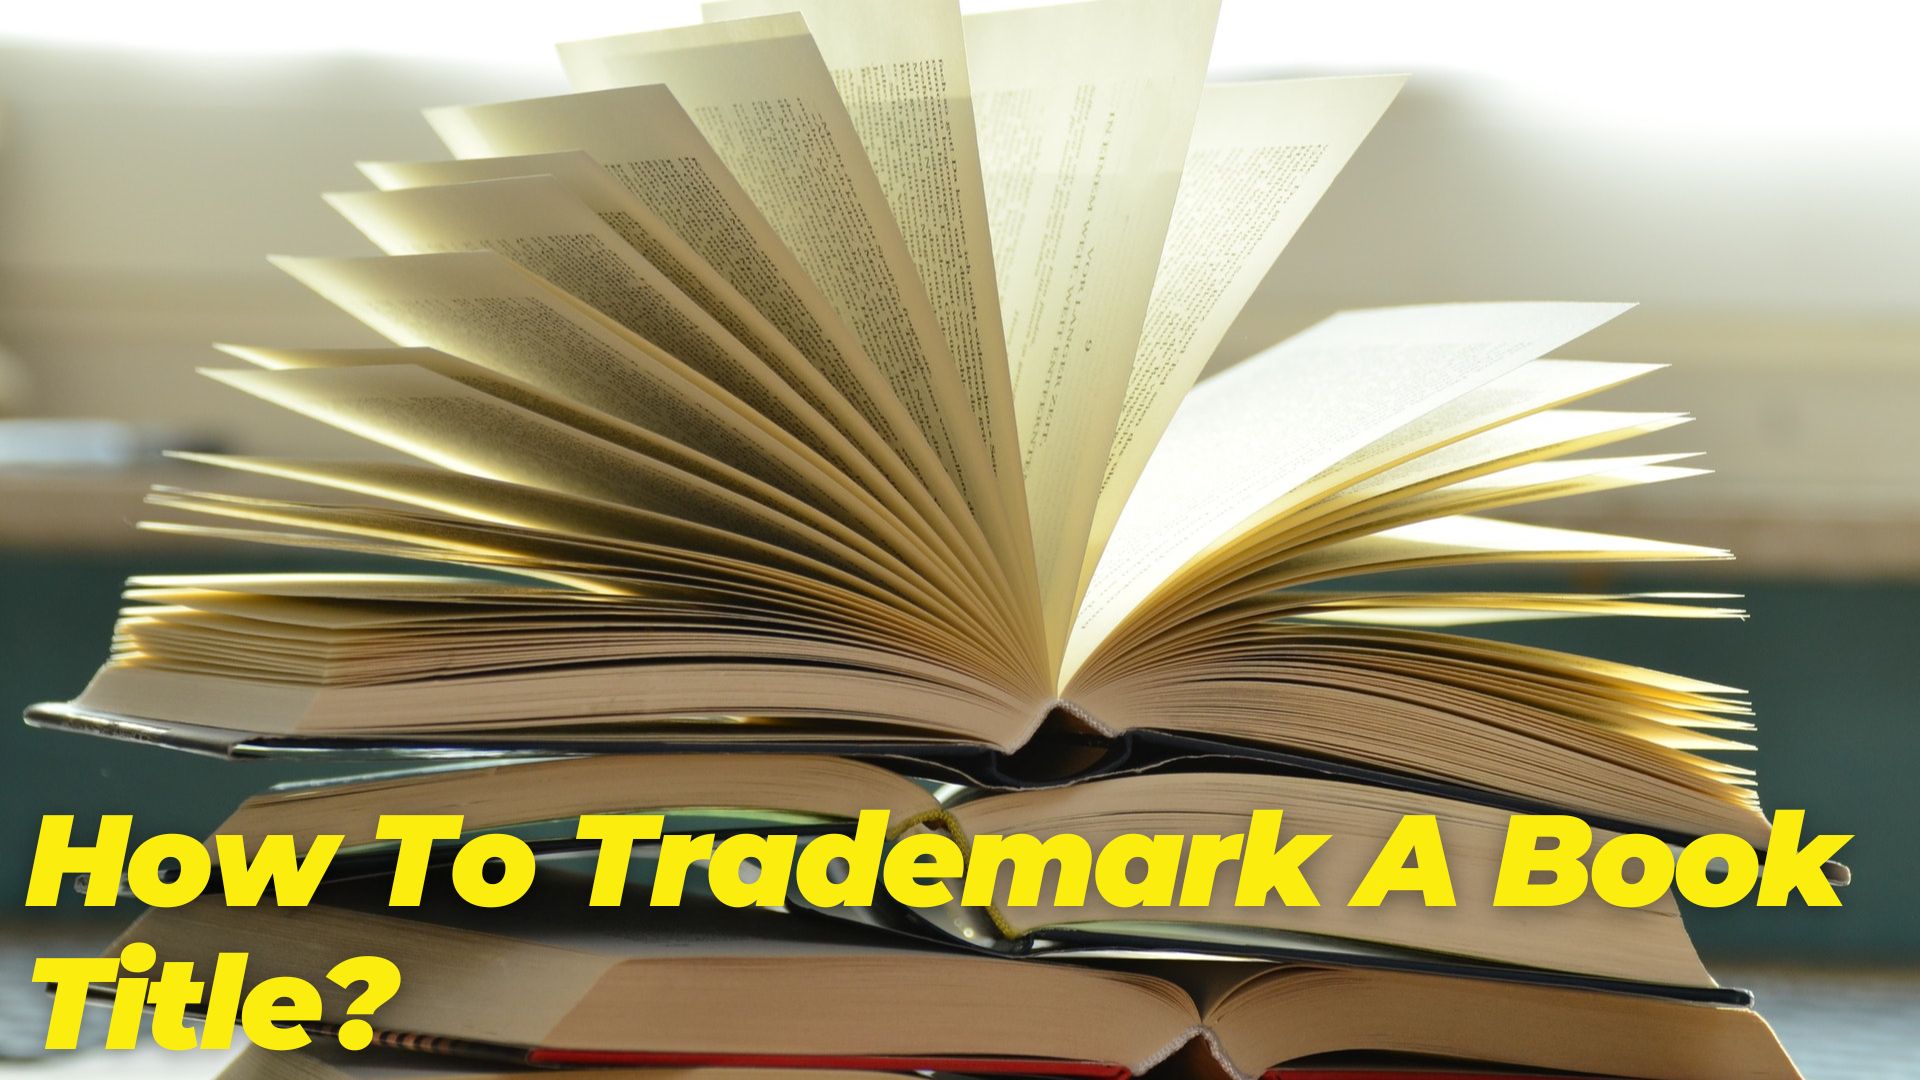 How To Trademark A Book Title?